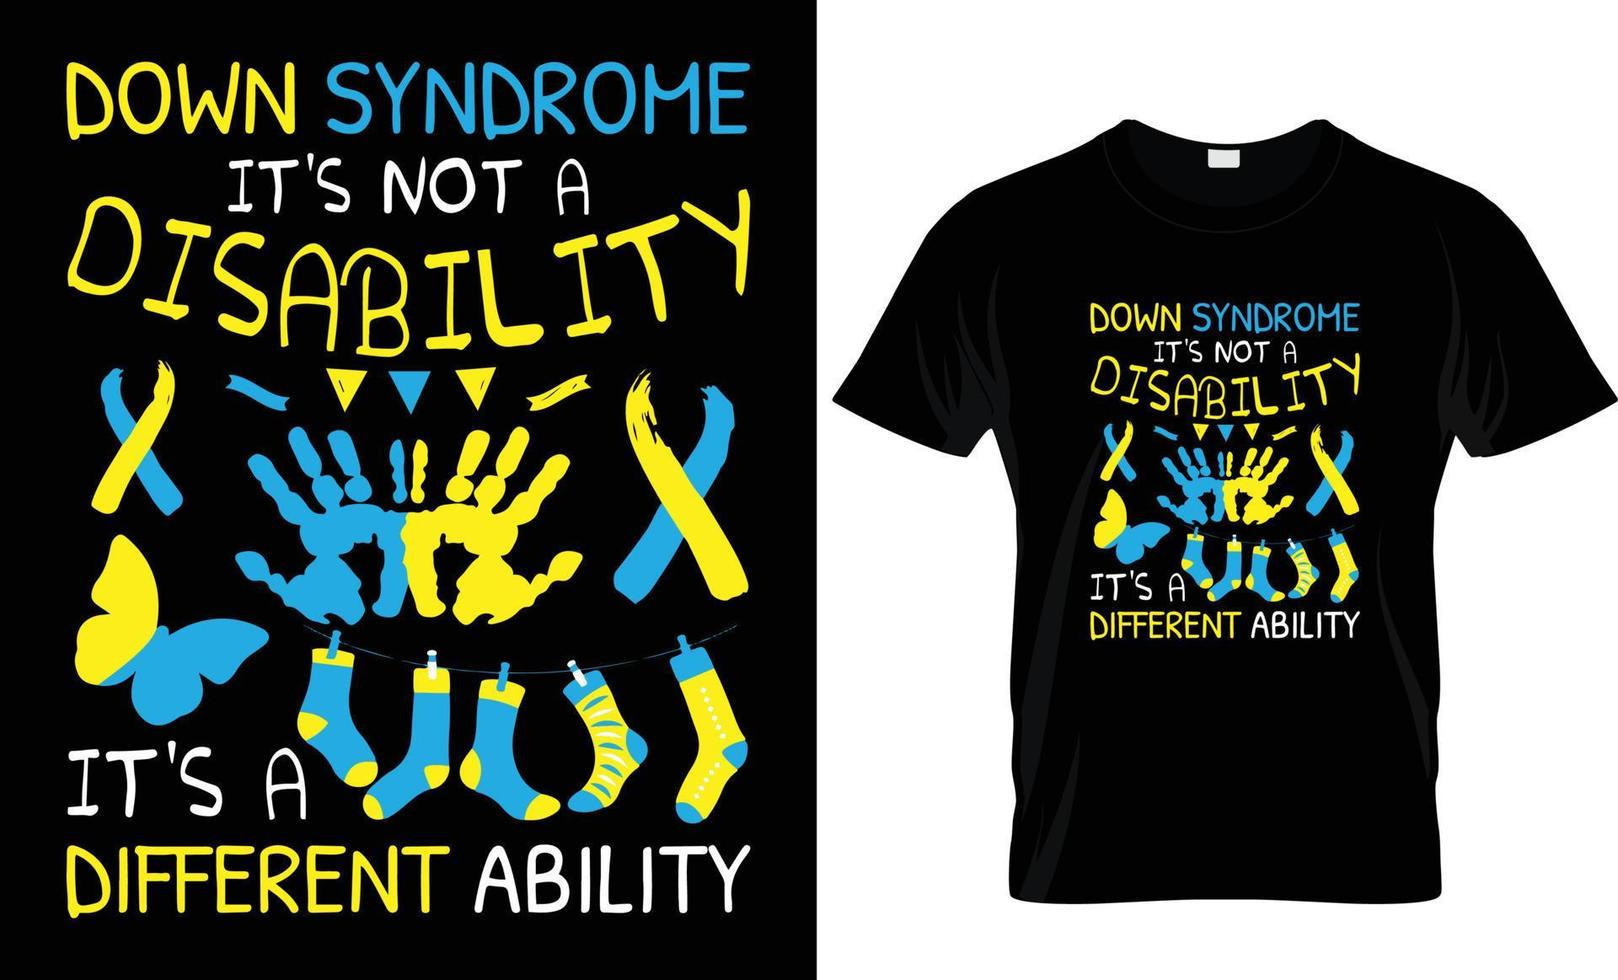 DownSyndrome T - Shirts' design vector